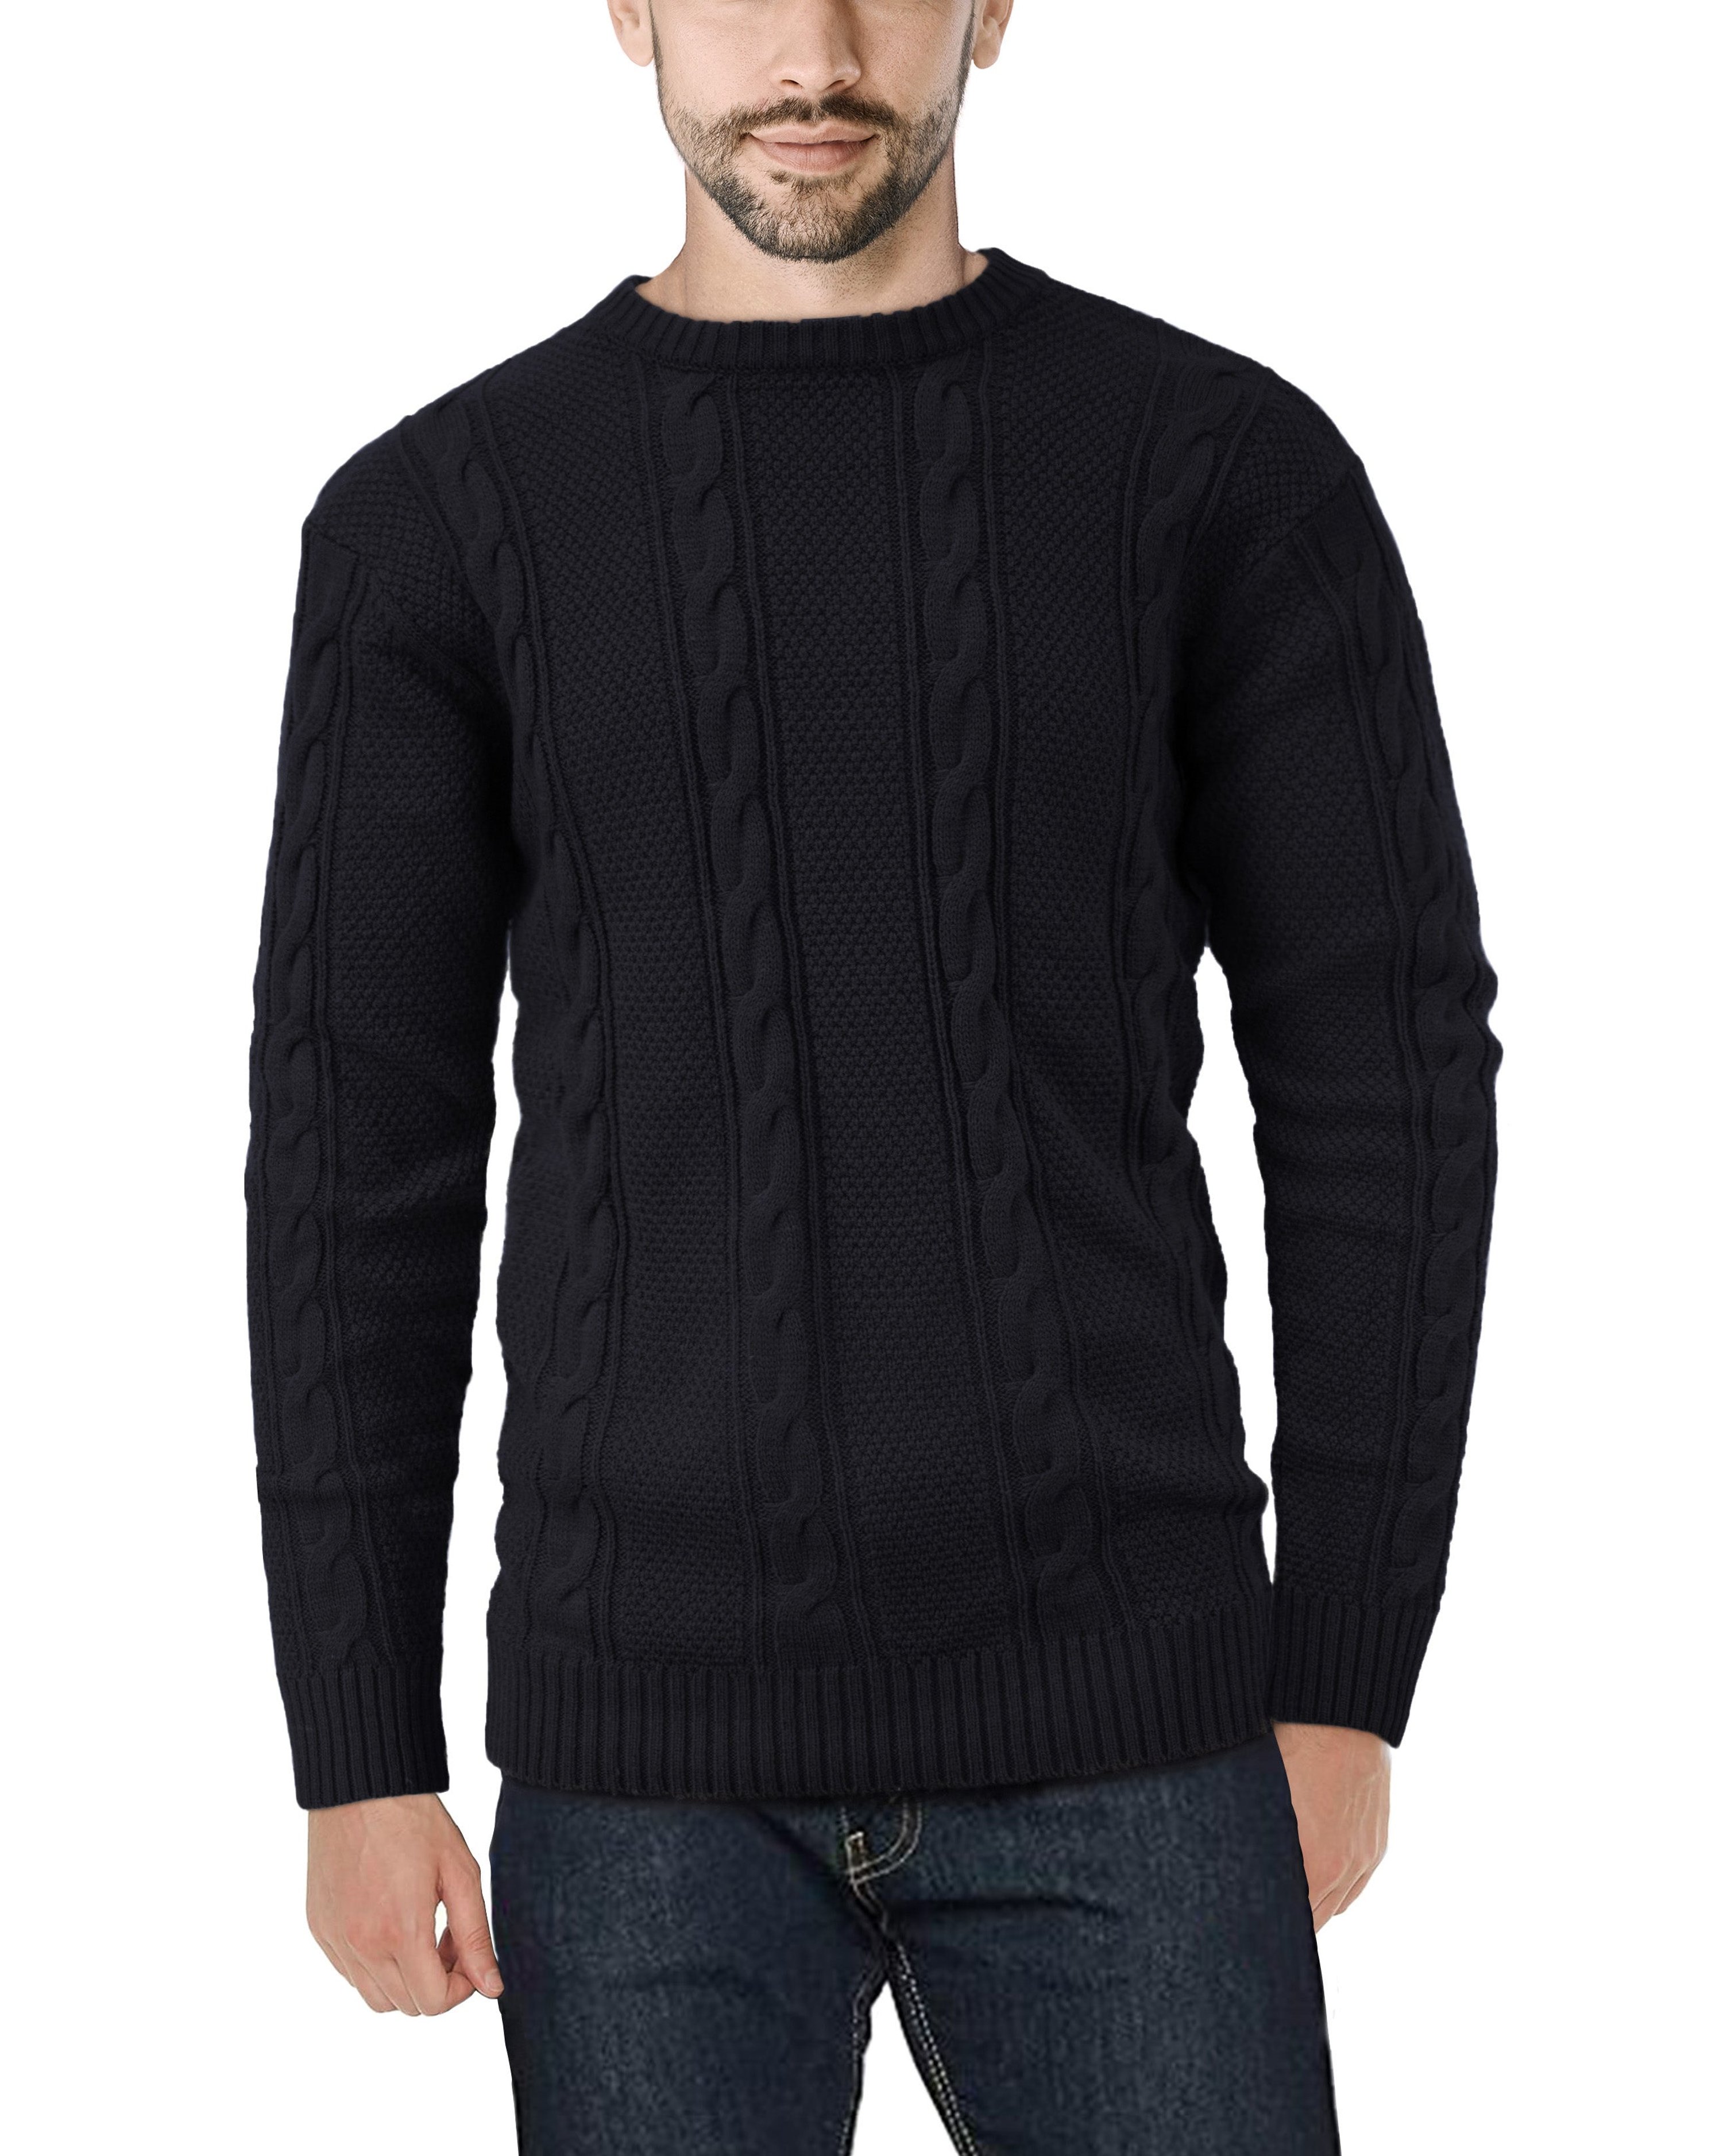 X-RAY X RAY CREWNECK CABLE KNITTED PULLOVER SWEATER